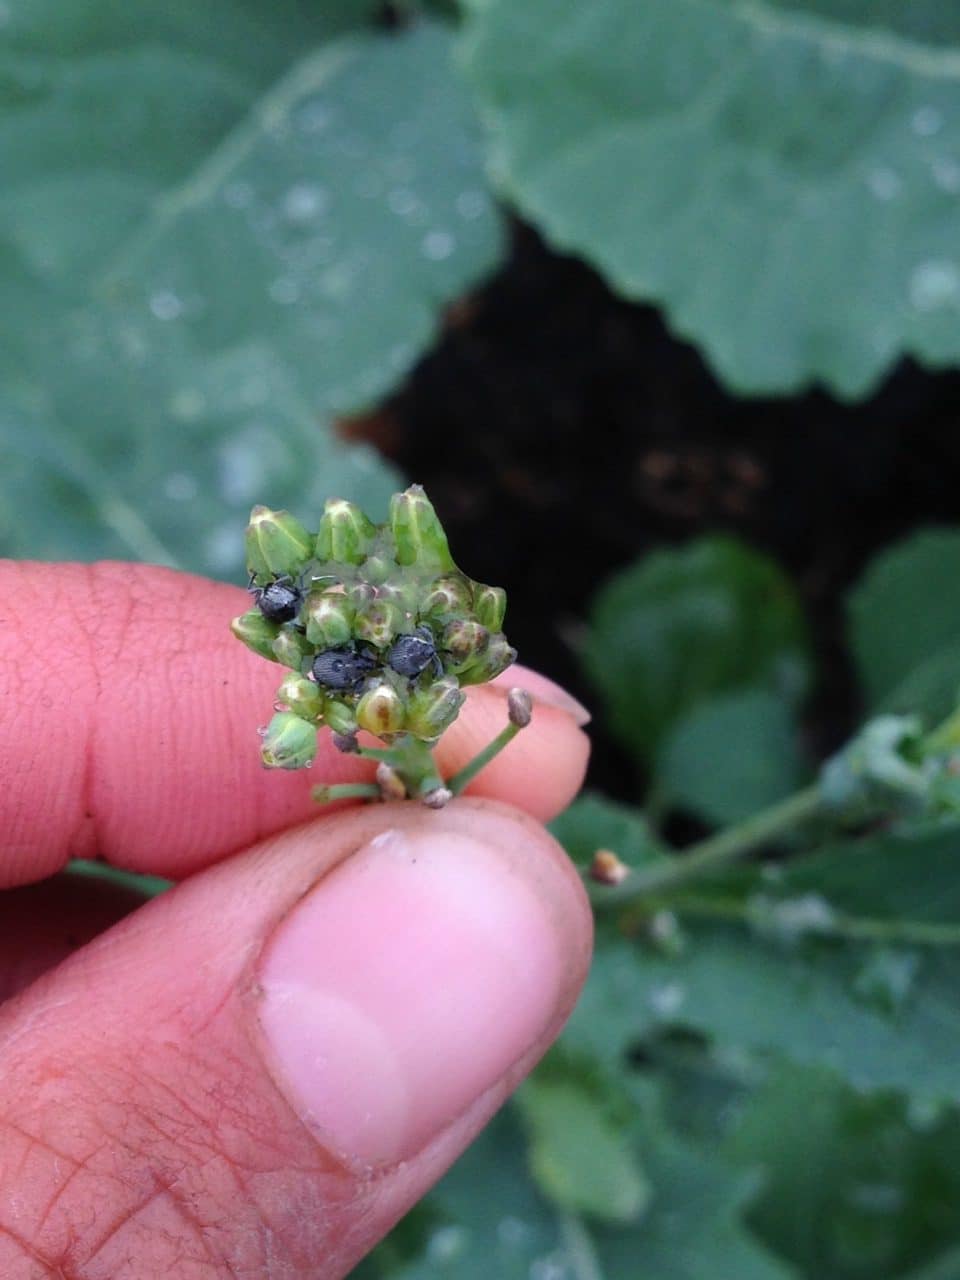 Cabbage seedpod weevils can arrive early, but this is still too early to spray.